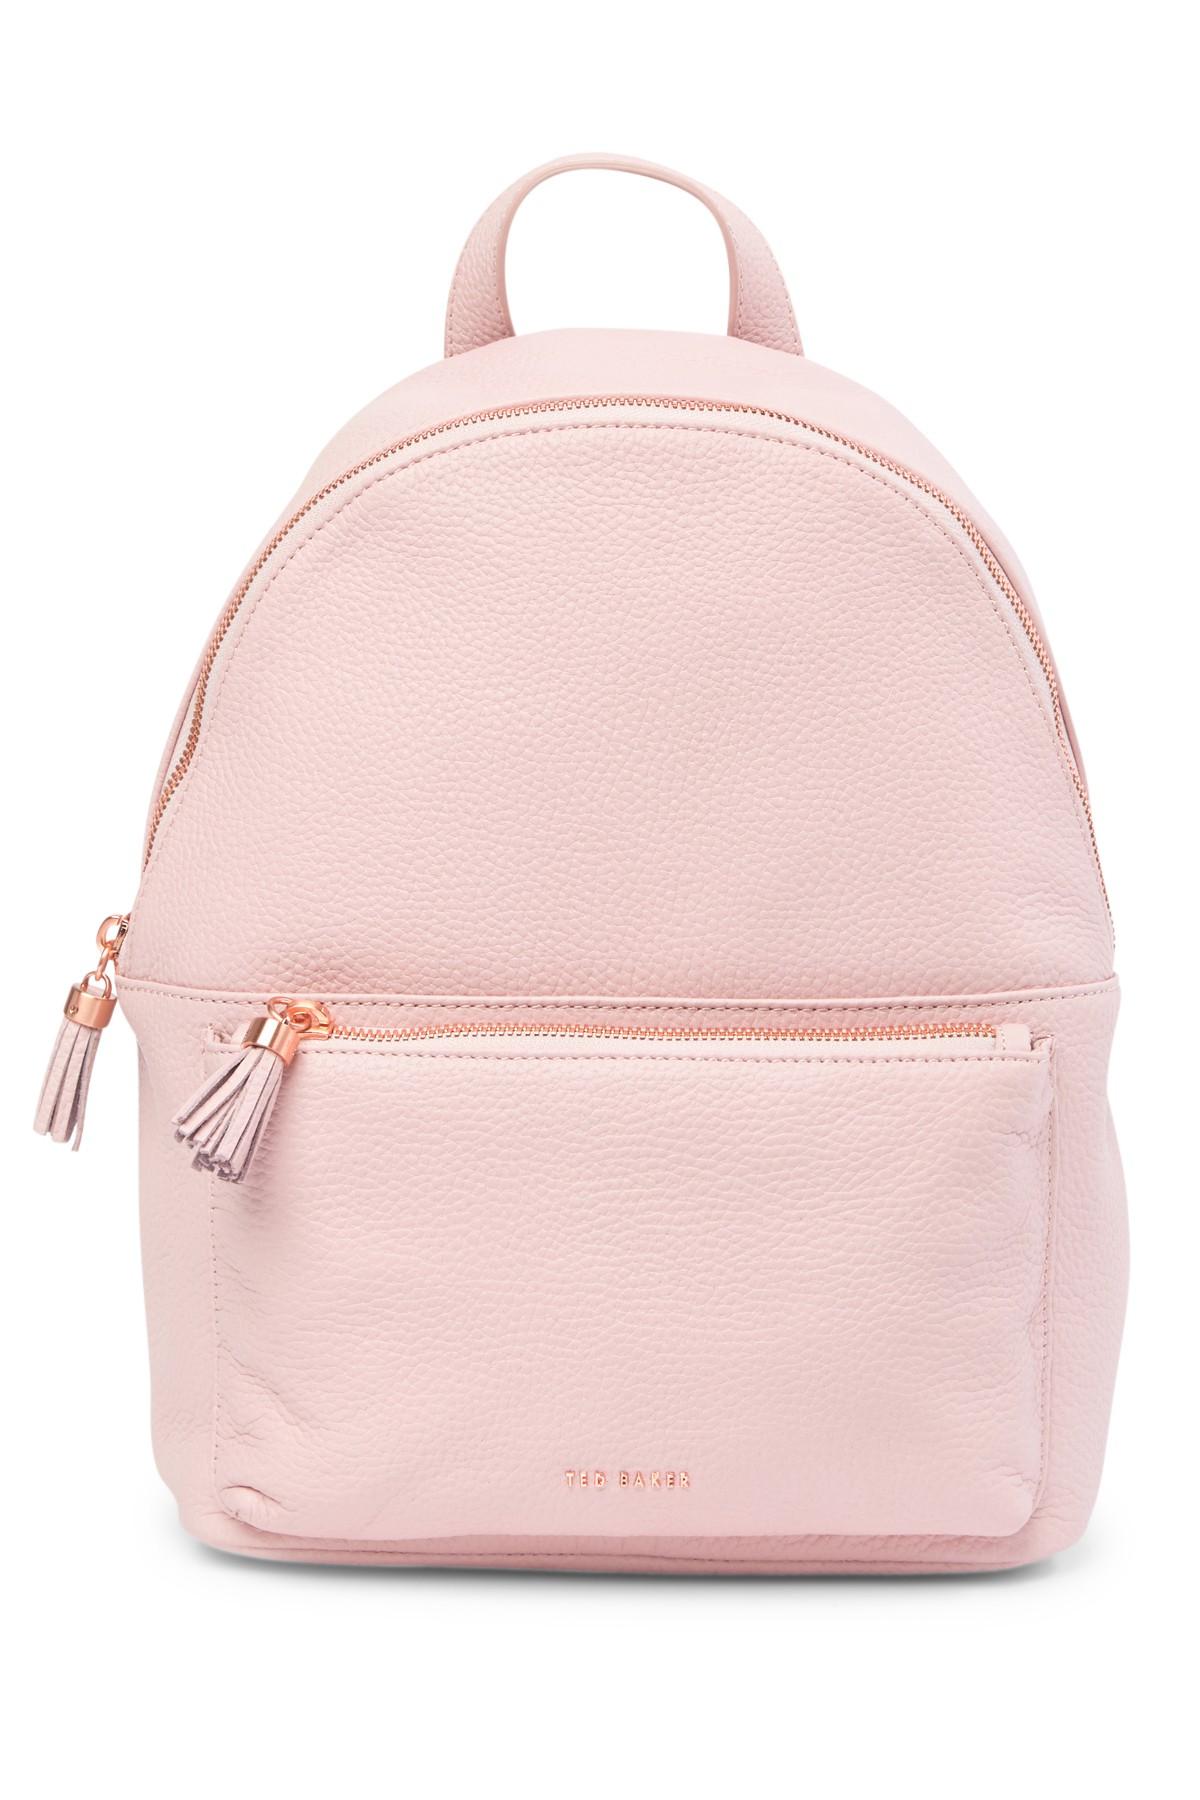 Ted Baker Leather Backpack :: Keweenaw Bay Indian Community